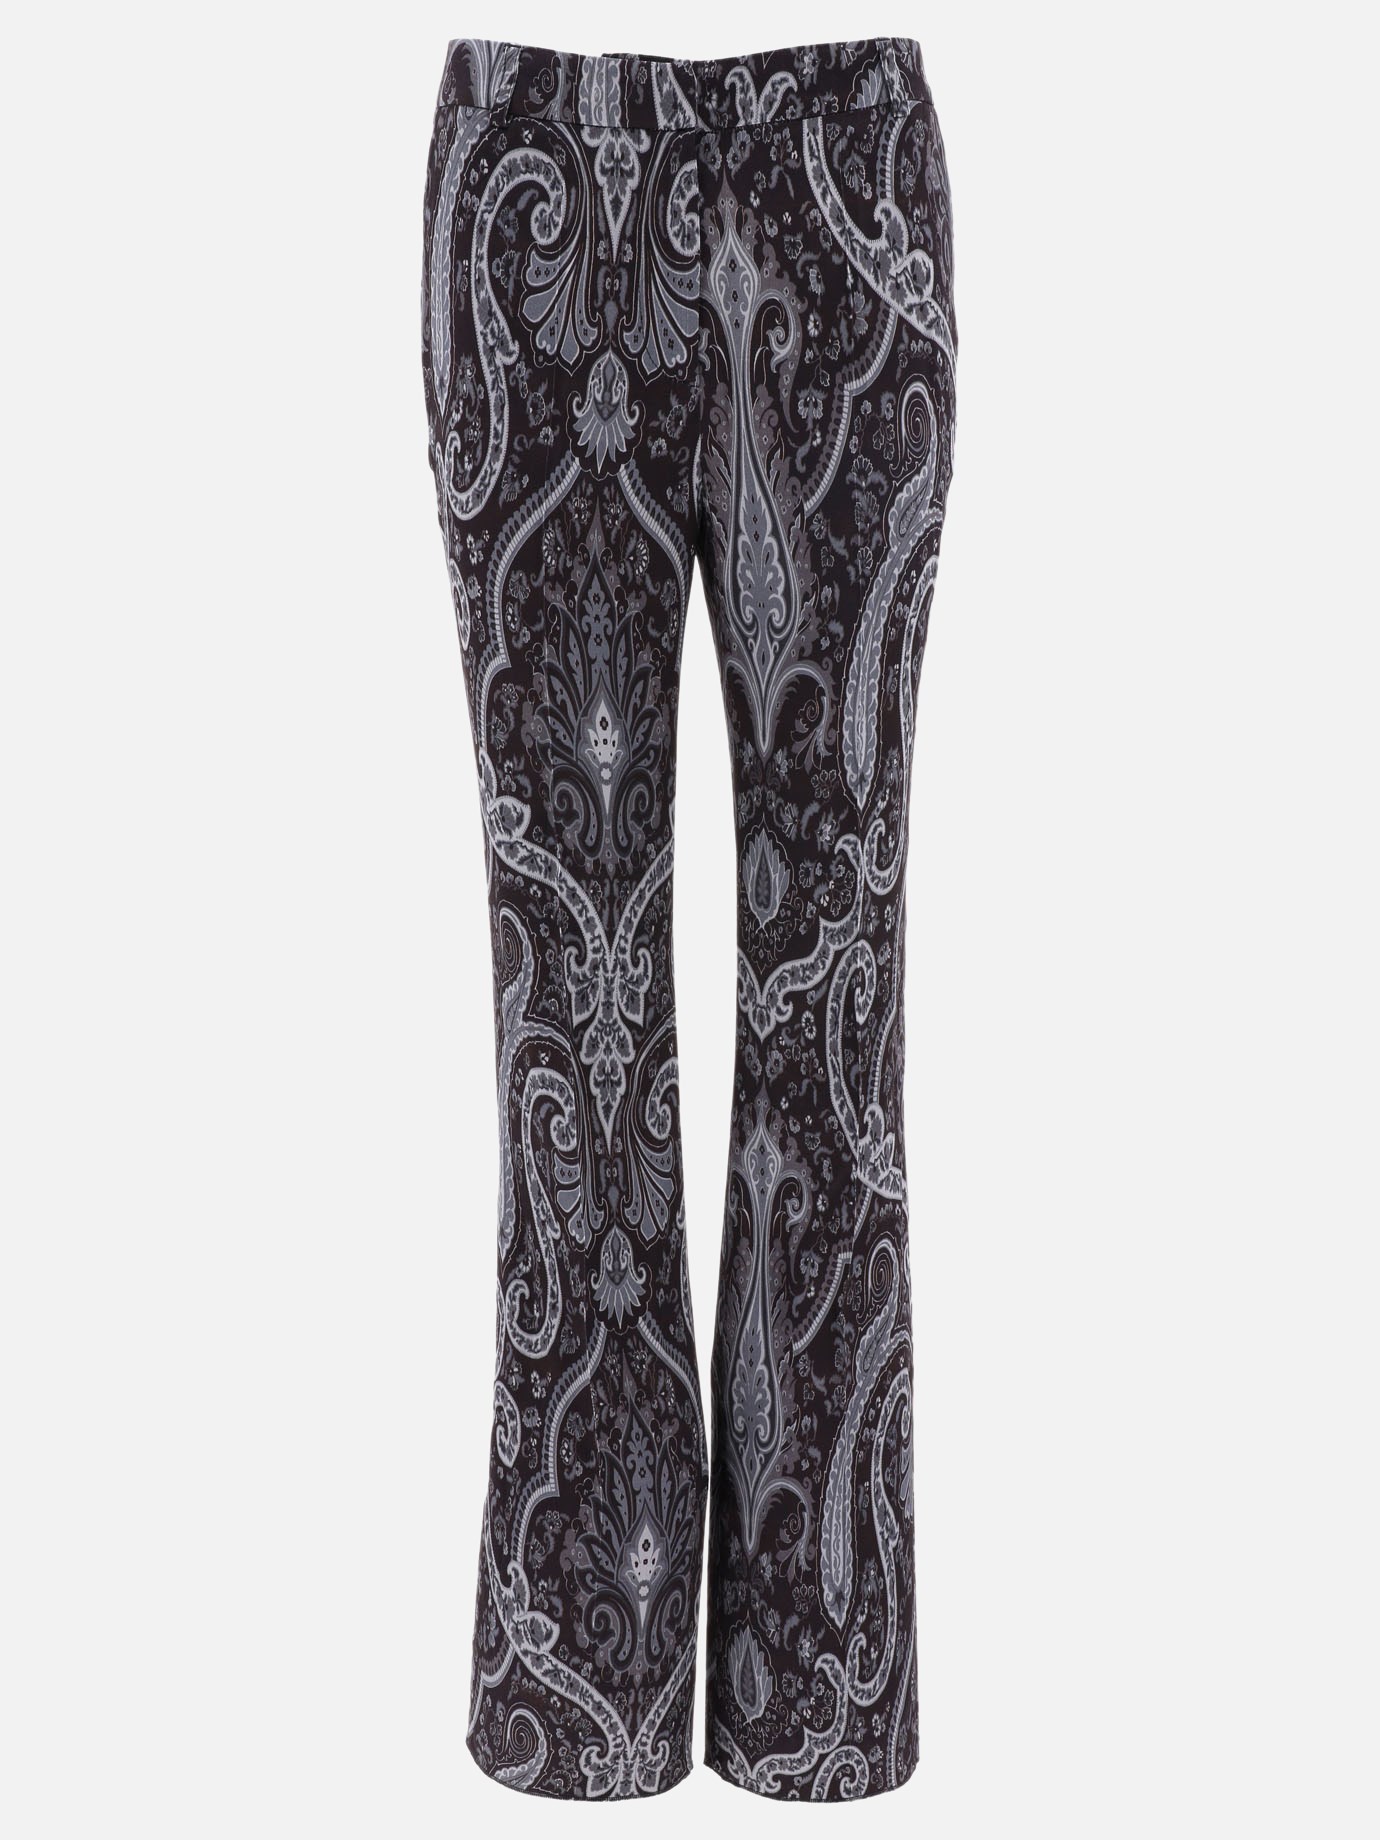  Paisley  trousersby Etro - 0